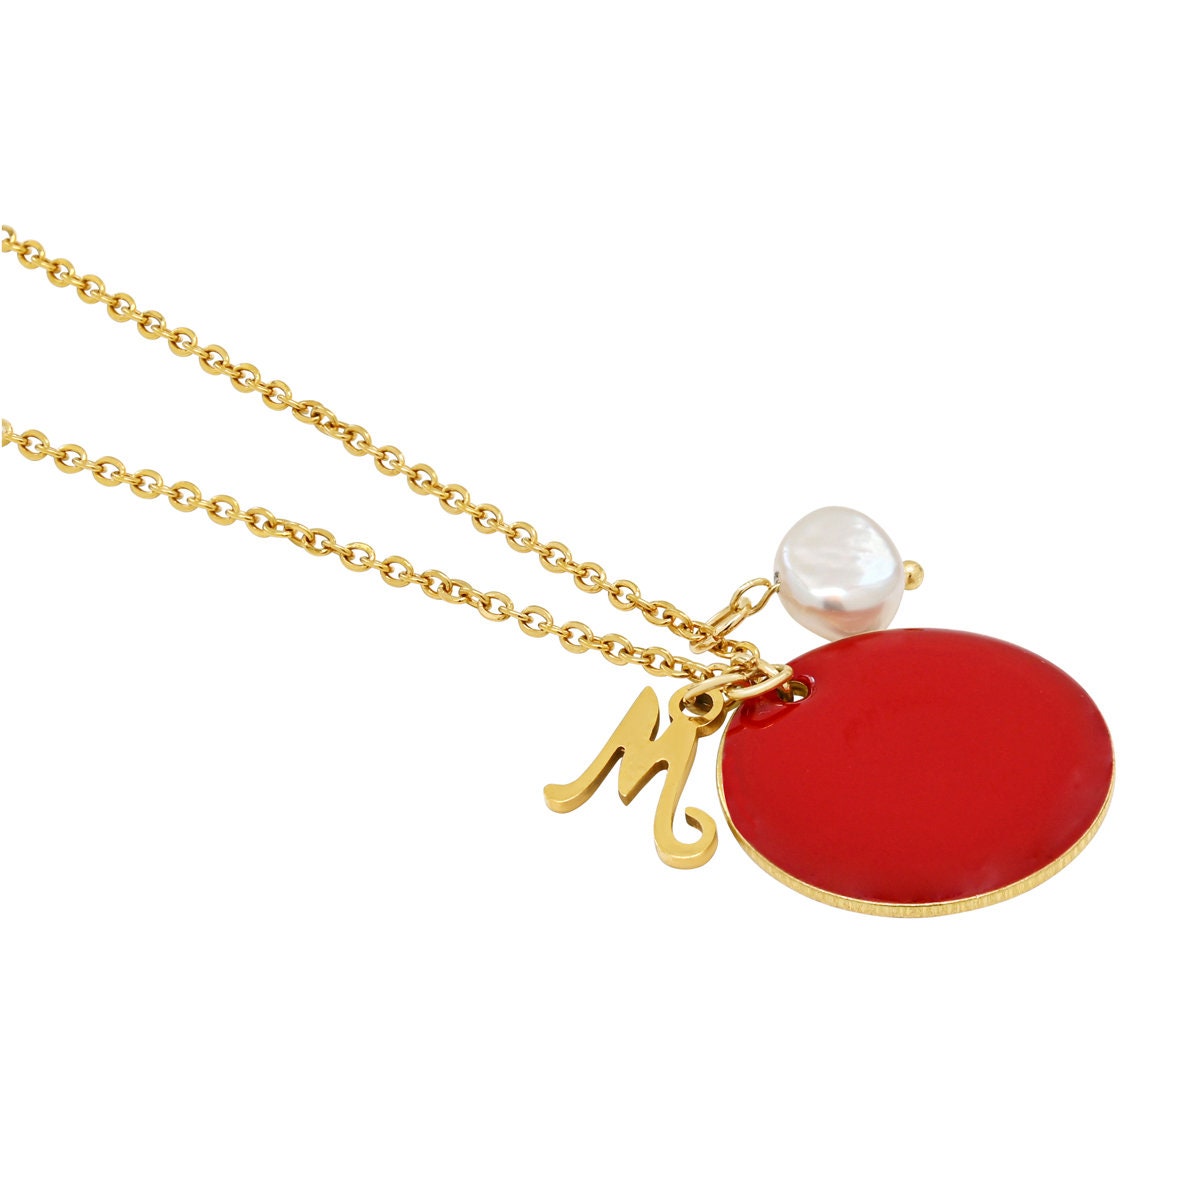 "Le Délice" Waterproof "Imperméable” Personalized Initial Enamel and Pearl Script Necklace - Red